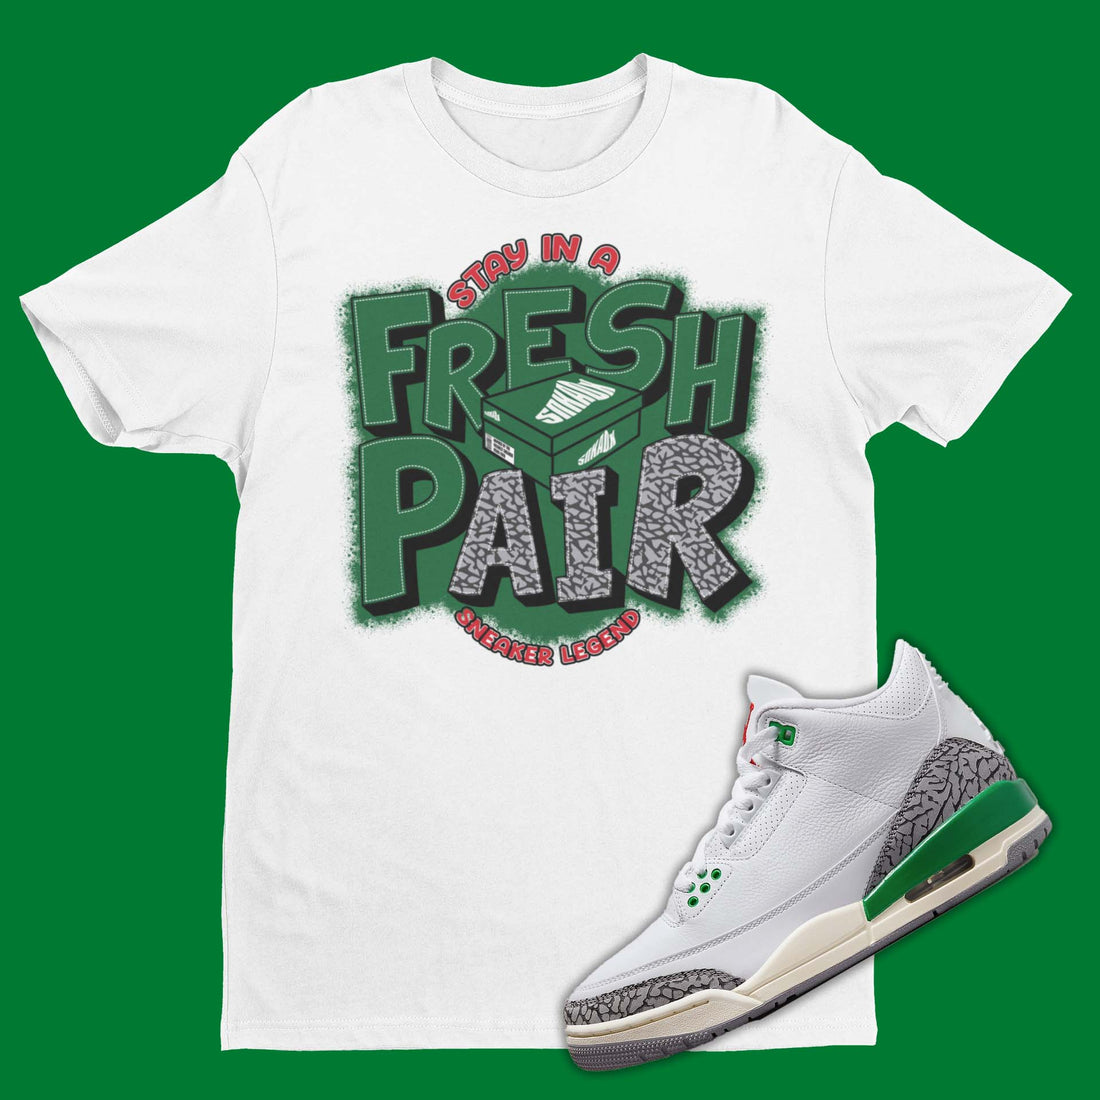 Air Jordan 3 Lucky Green Matching Shirt with Fresh Pair on from with elephant print